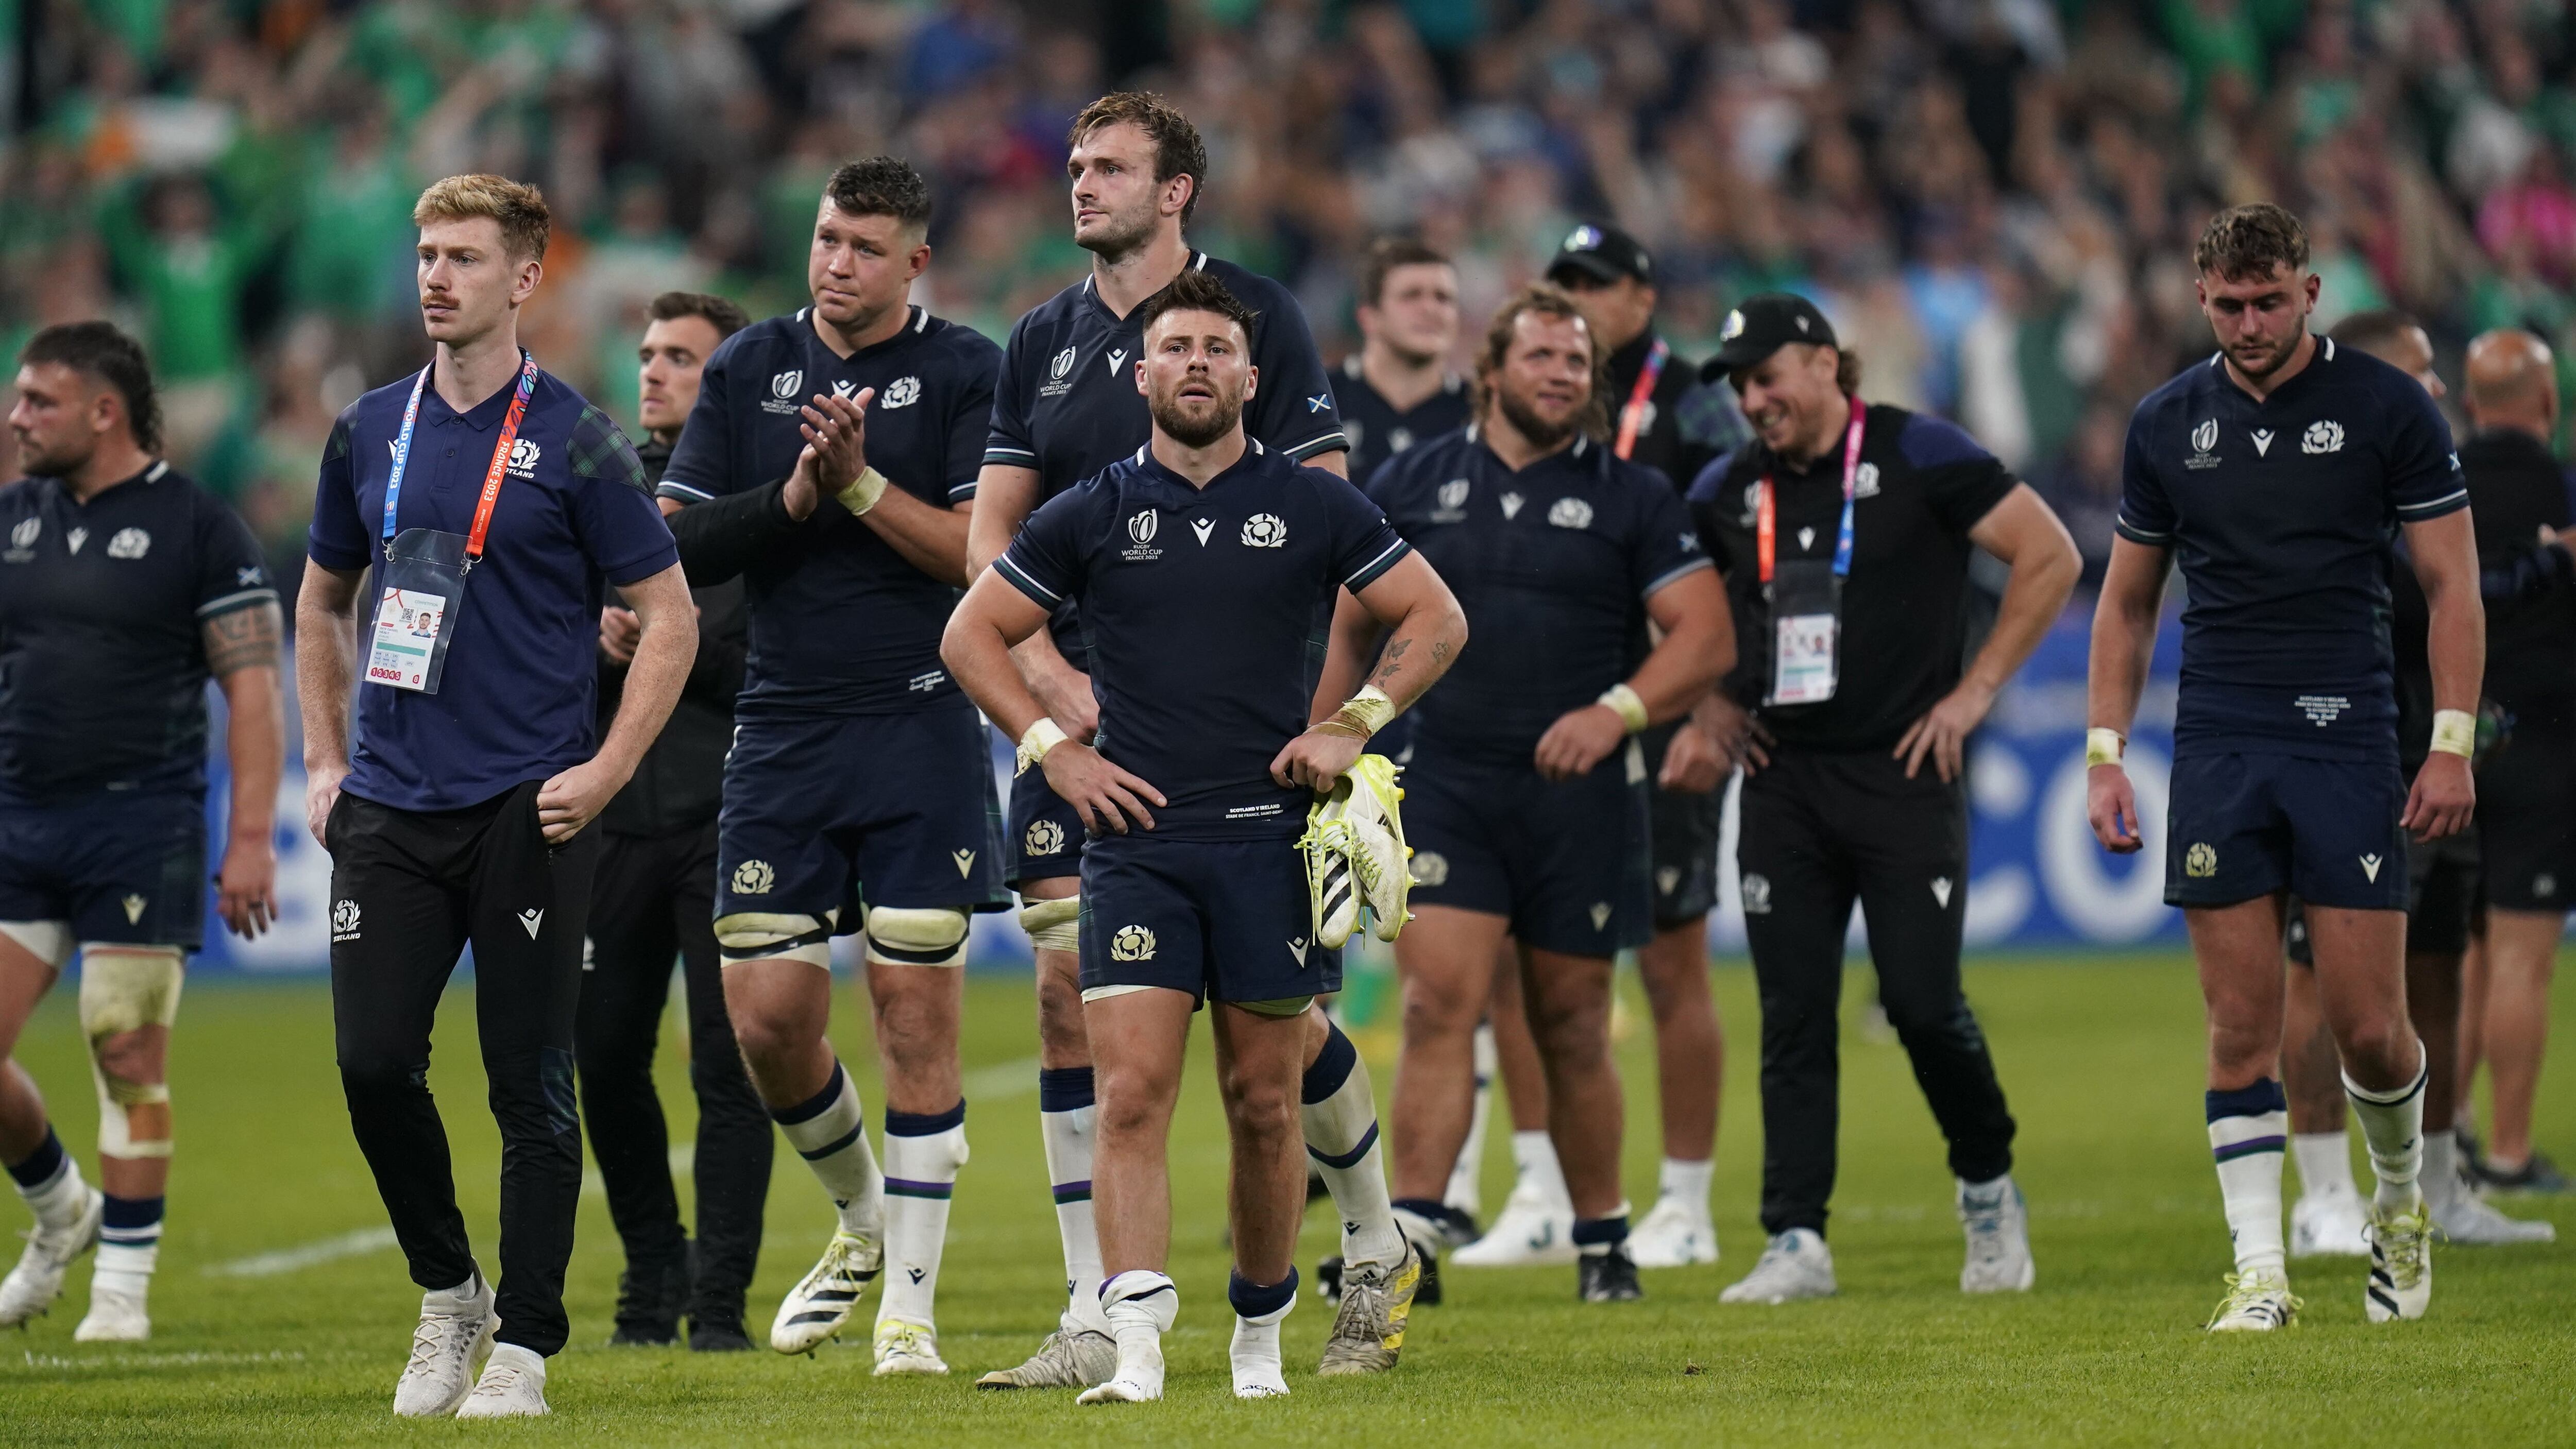 Scotland suffered a pool-stage exit at the World Cup (Andrew Matthews/PA)